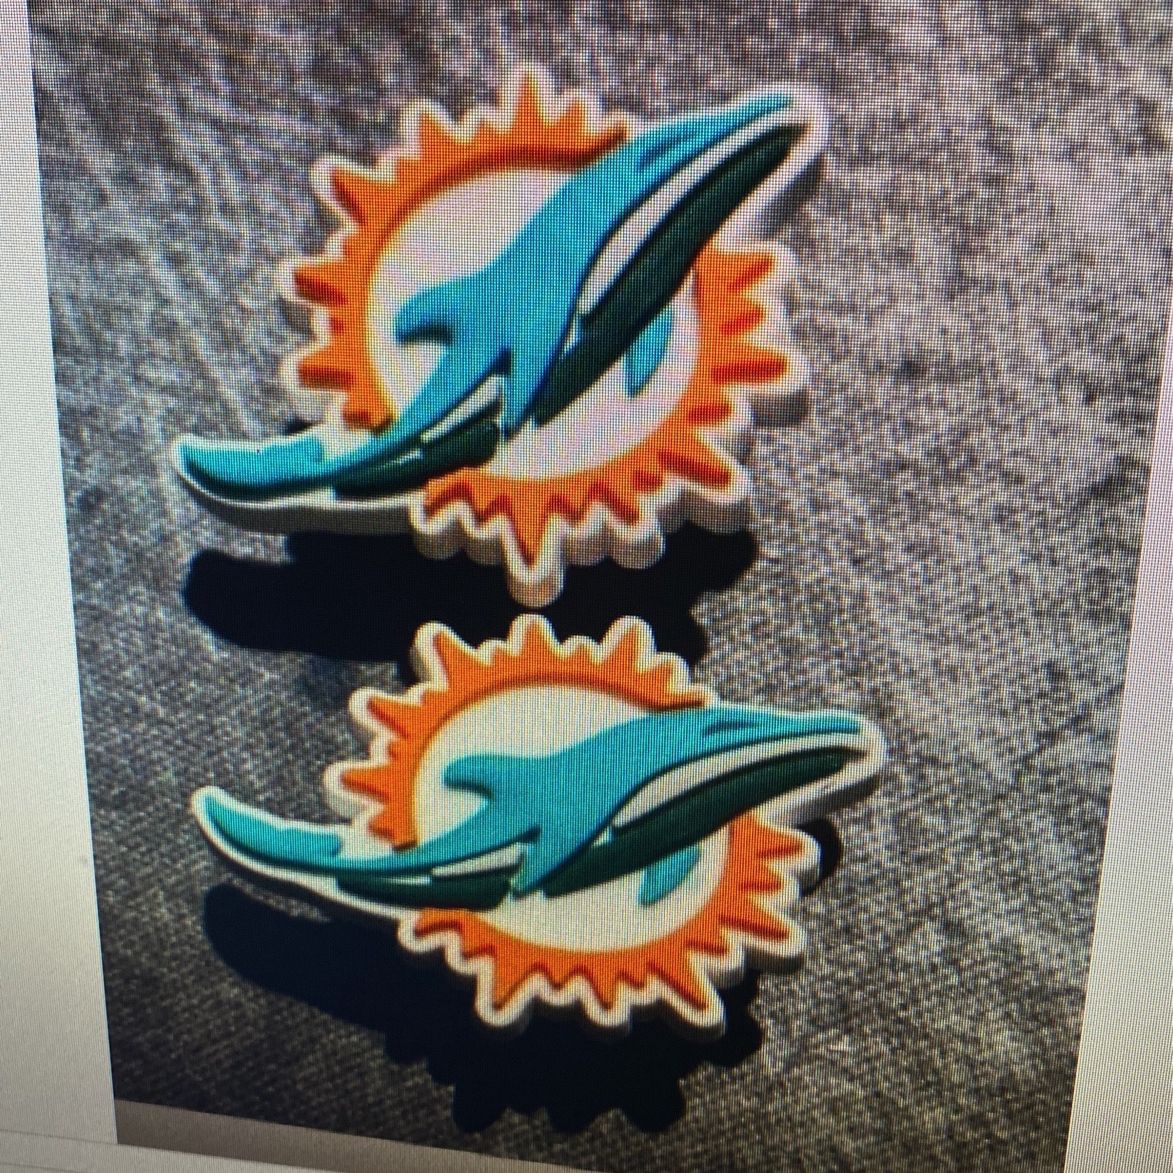 miami dolphins croc charms